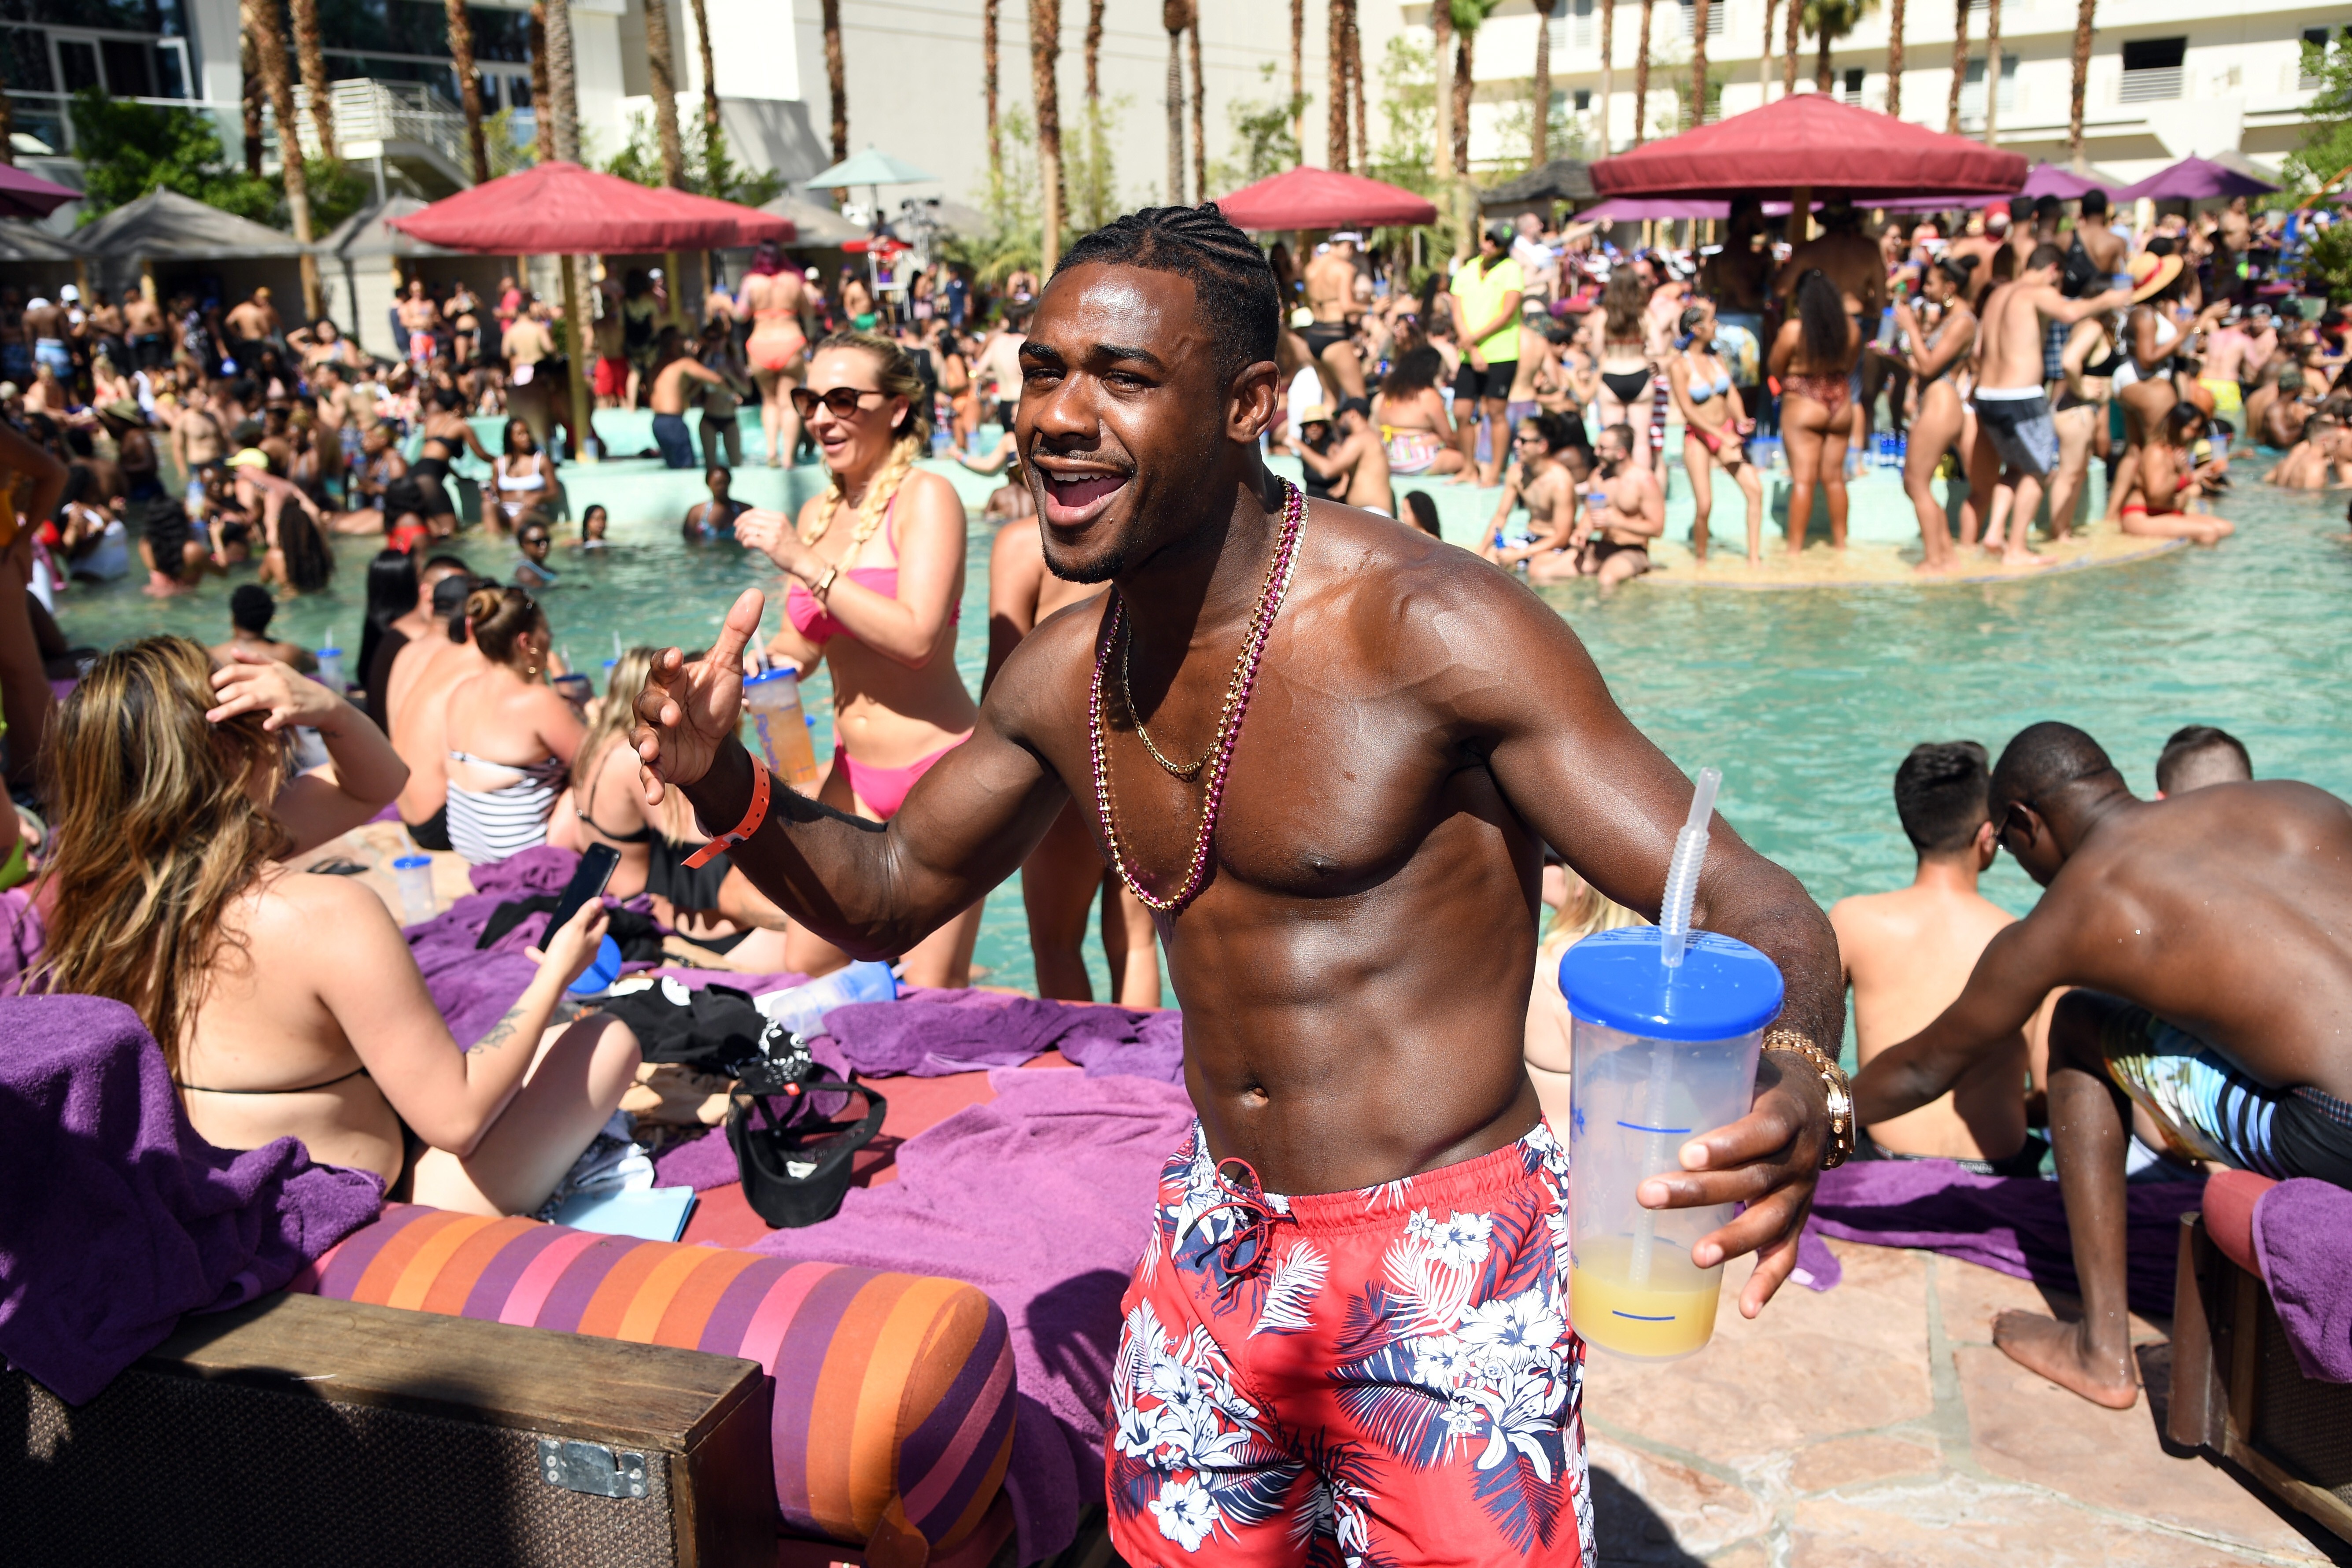 Bantamweight fighter Aljamain Sterling attends a UFC Pool Party at the Hard Rock Hotel & Casino in Las Vegas, Nevada in 2018. Photo: Al Powers/Zuffa LLC via Getty Images